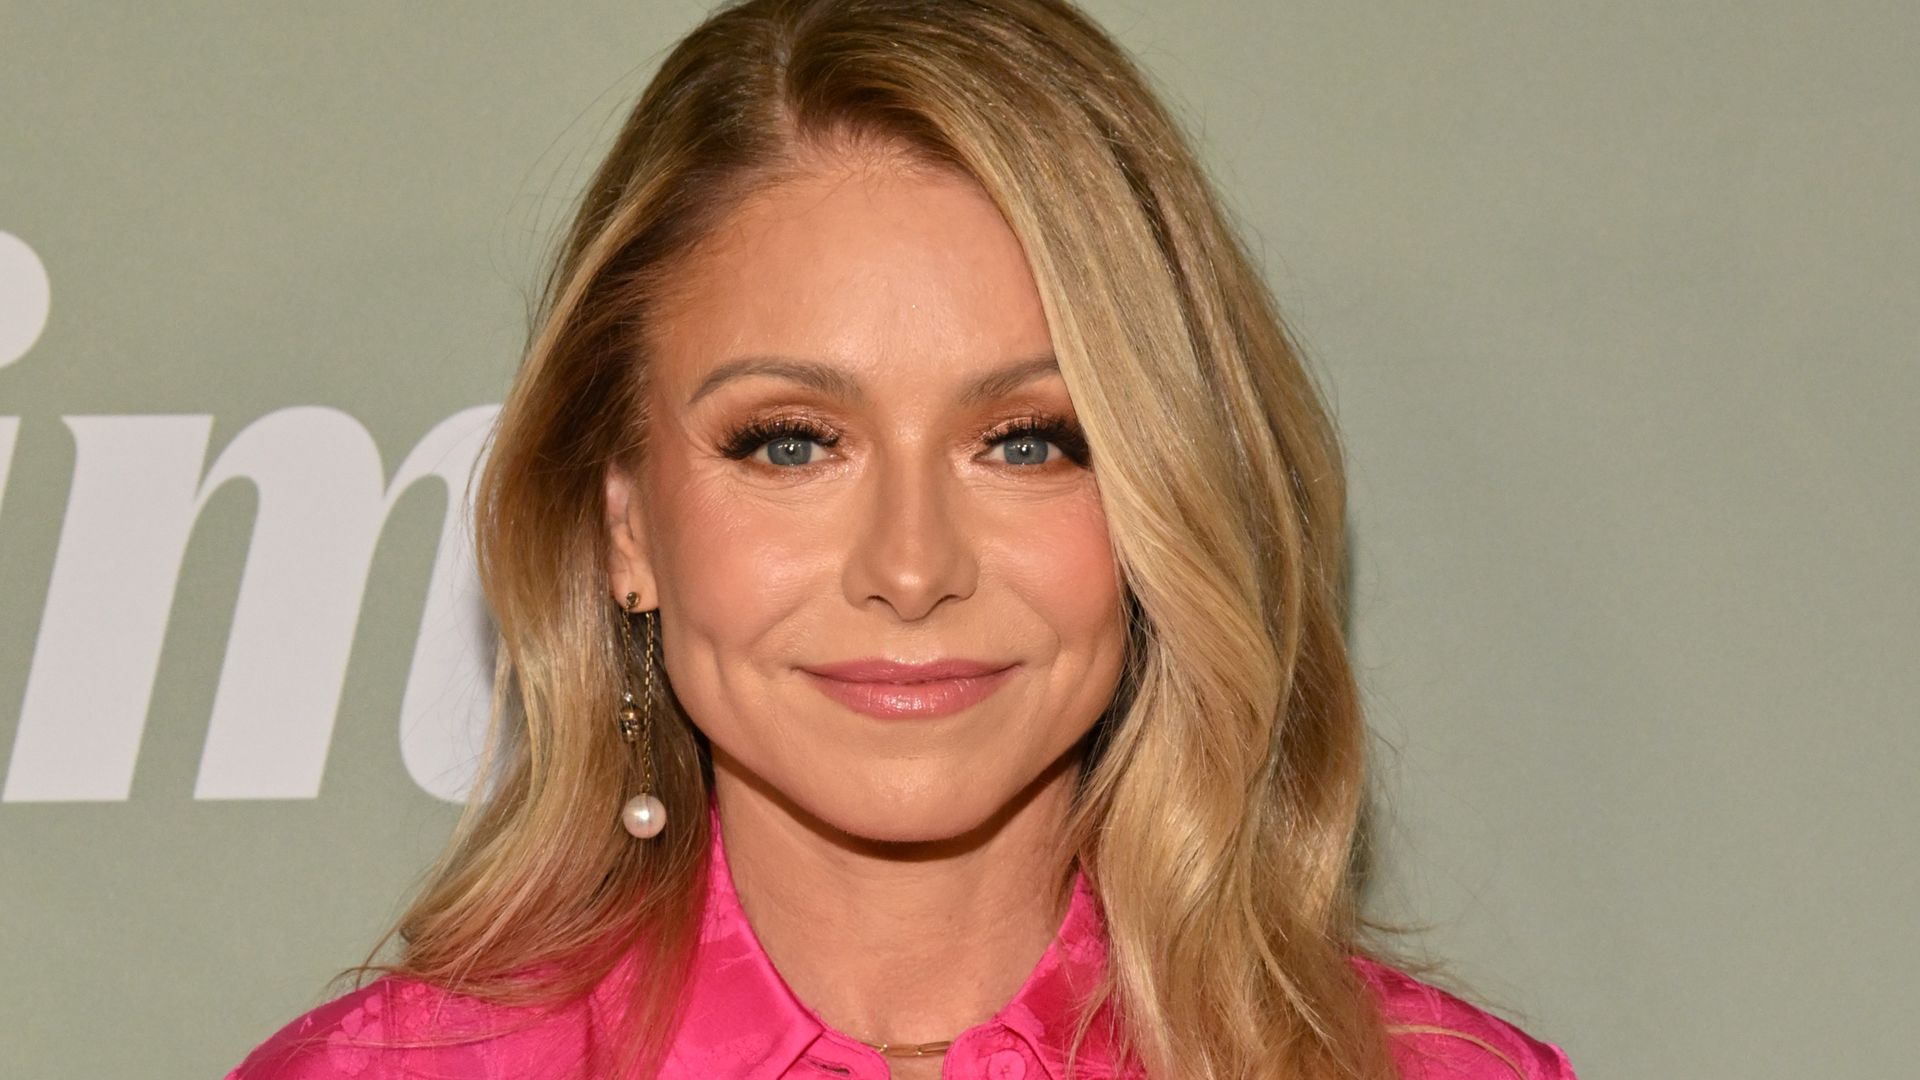 Kelly Ripa's son Michael's appearance in new photo leaves fans saying the same thing